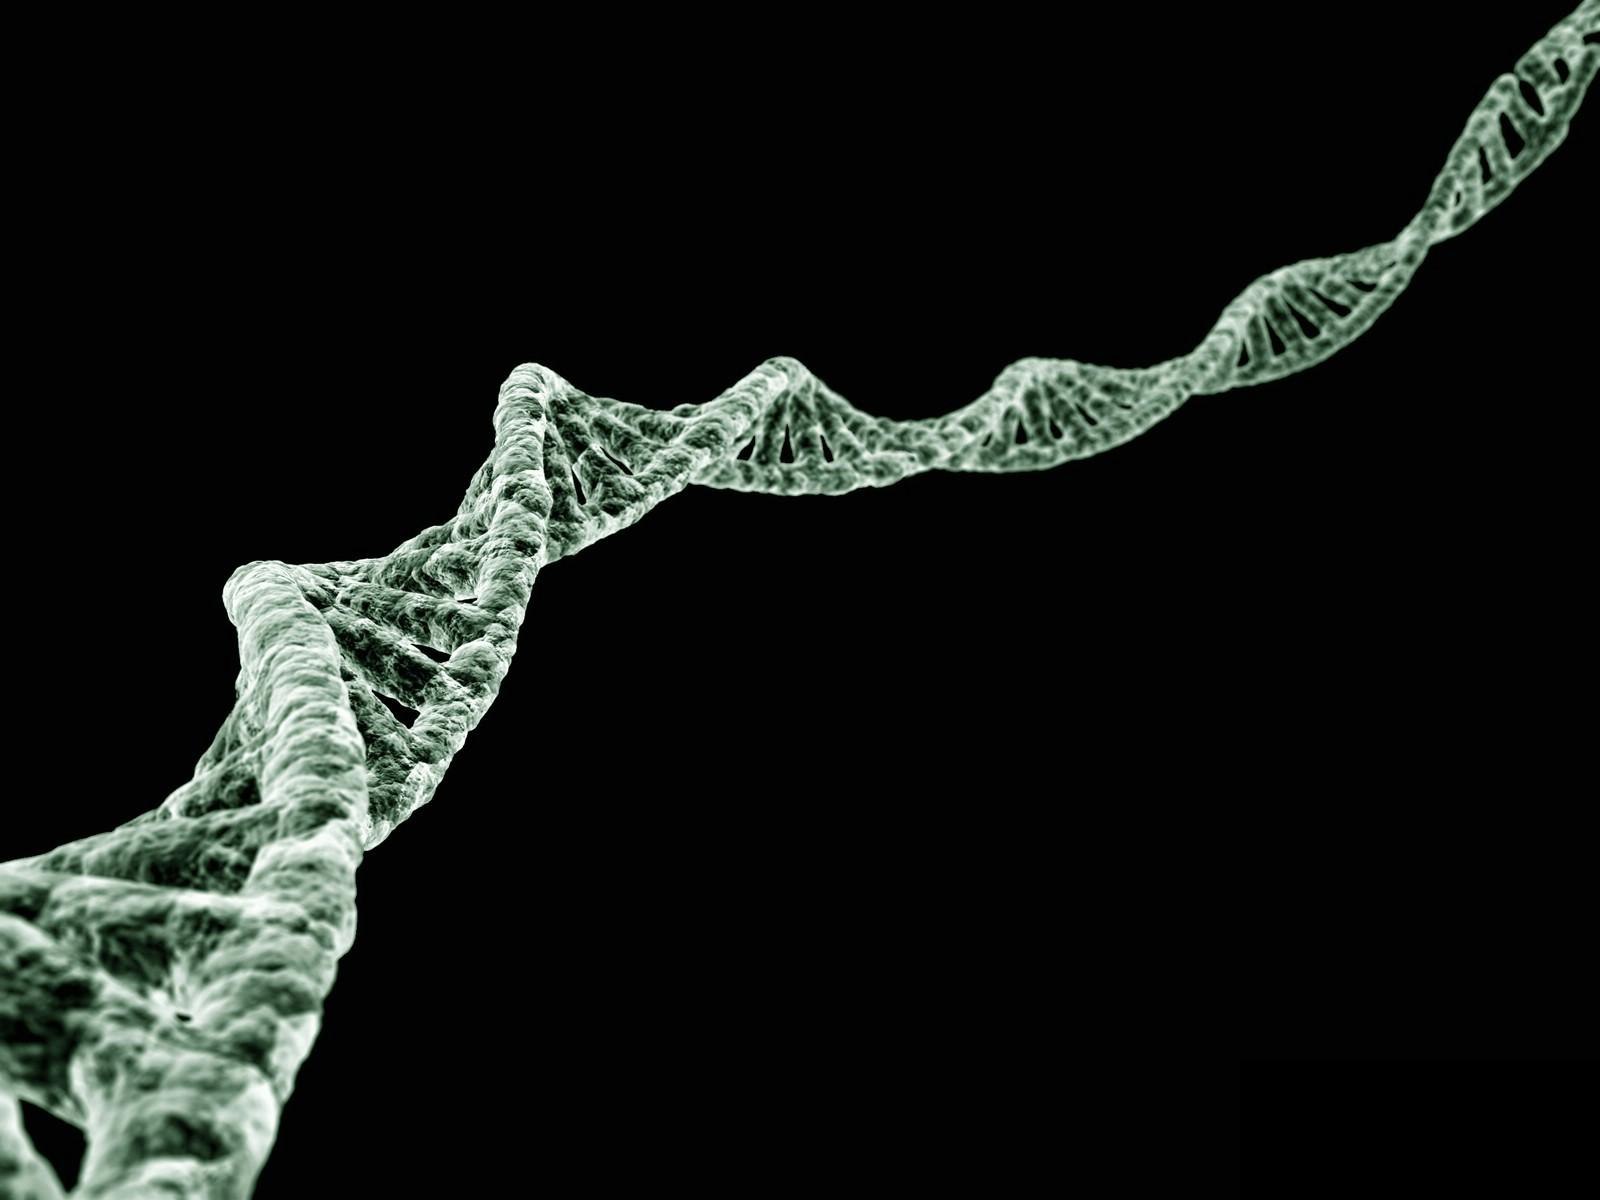 Dna wallpaper 1600x1200 - (#39455) - High Quality and Resolution ...